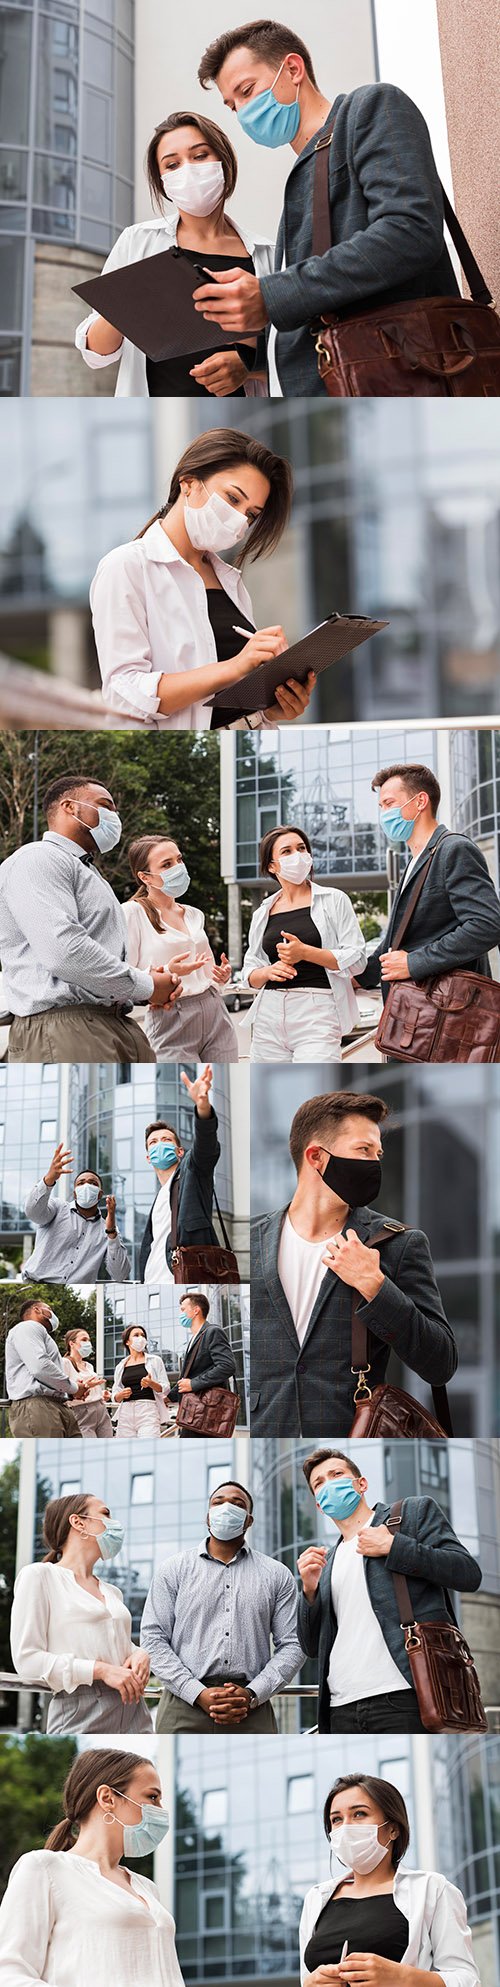 Colleagues chat outdoors during pandemic with face masks